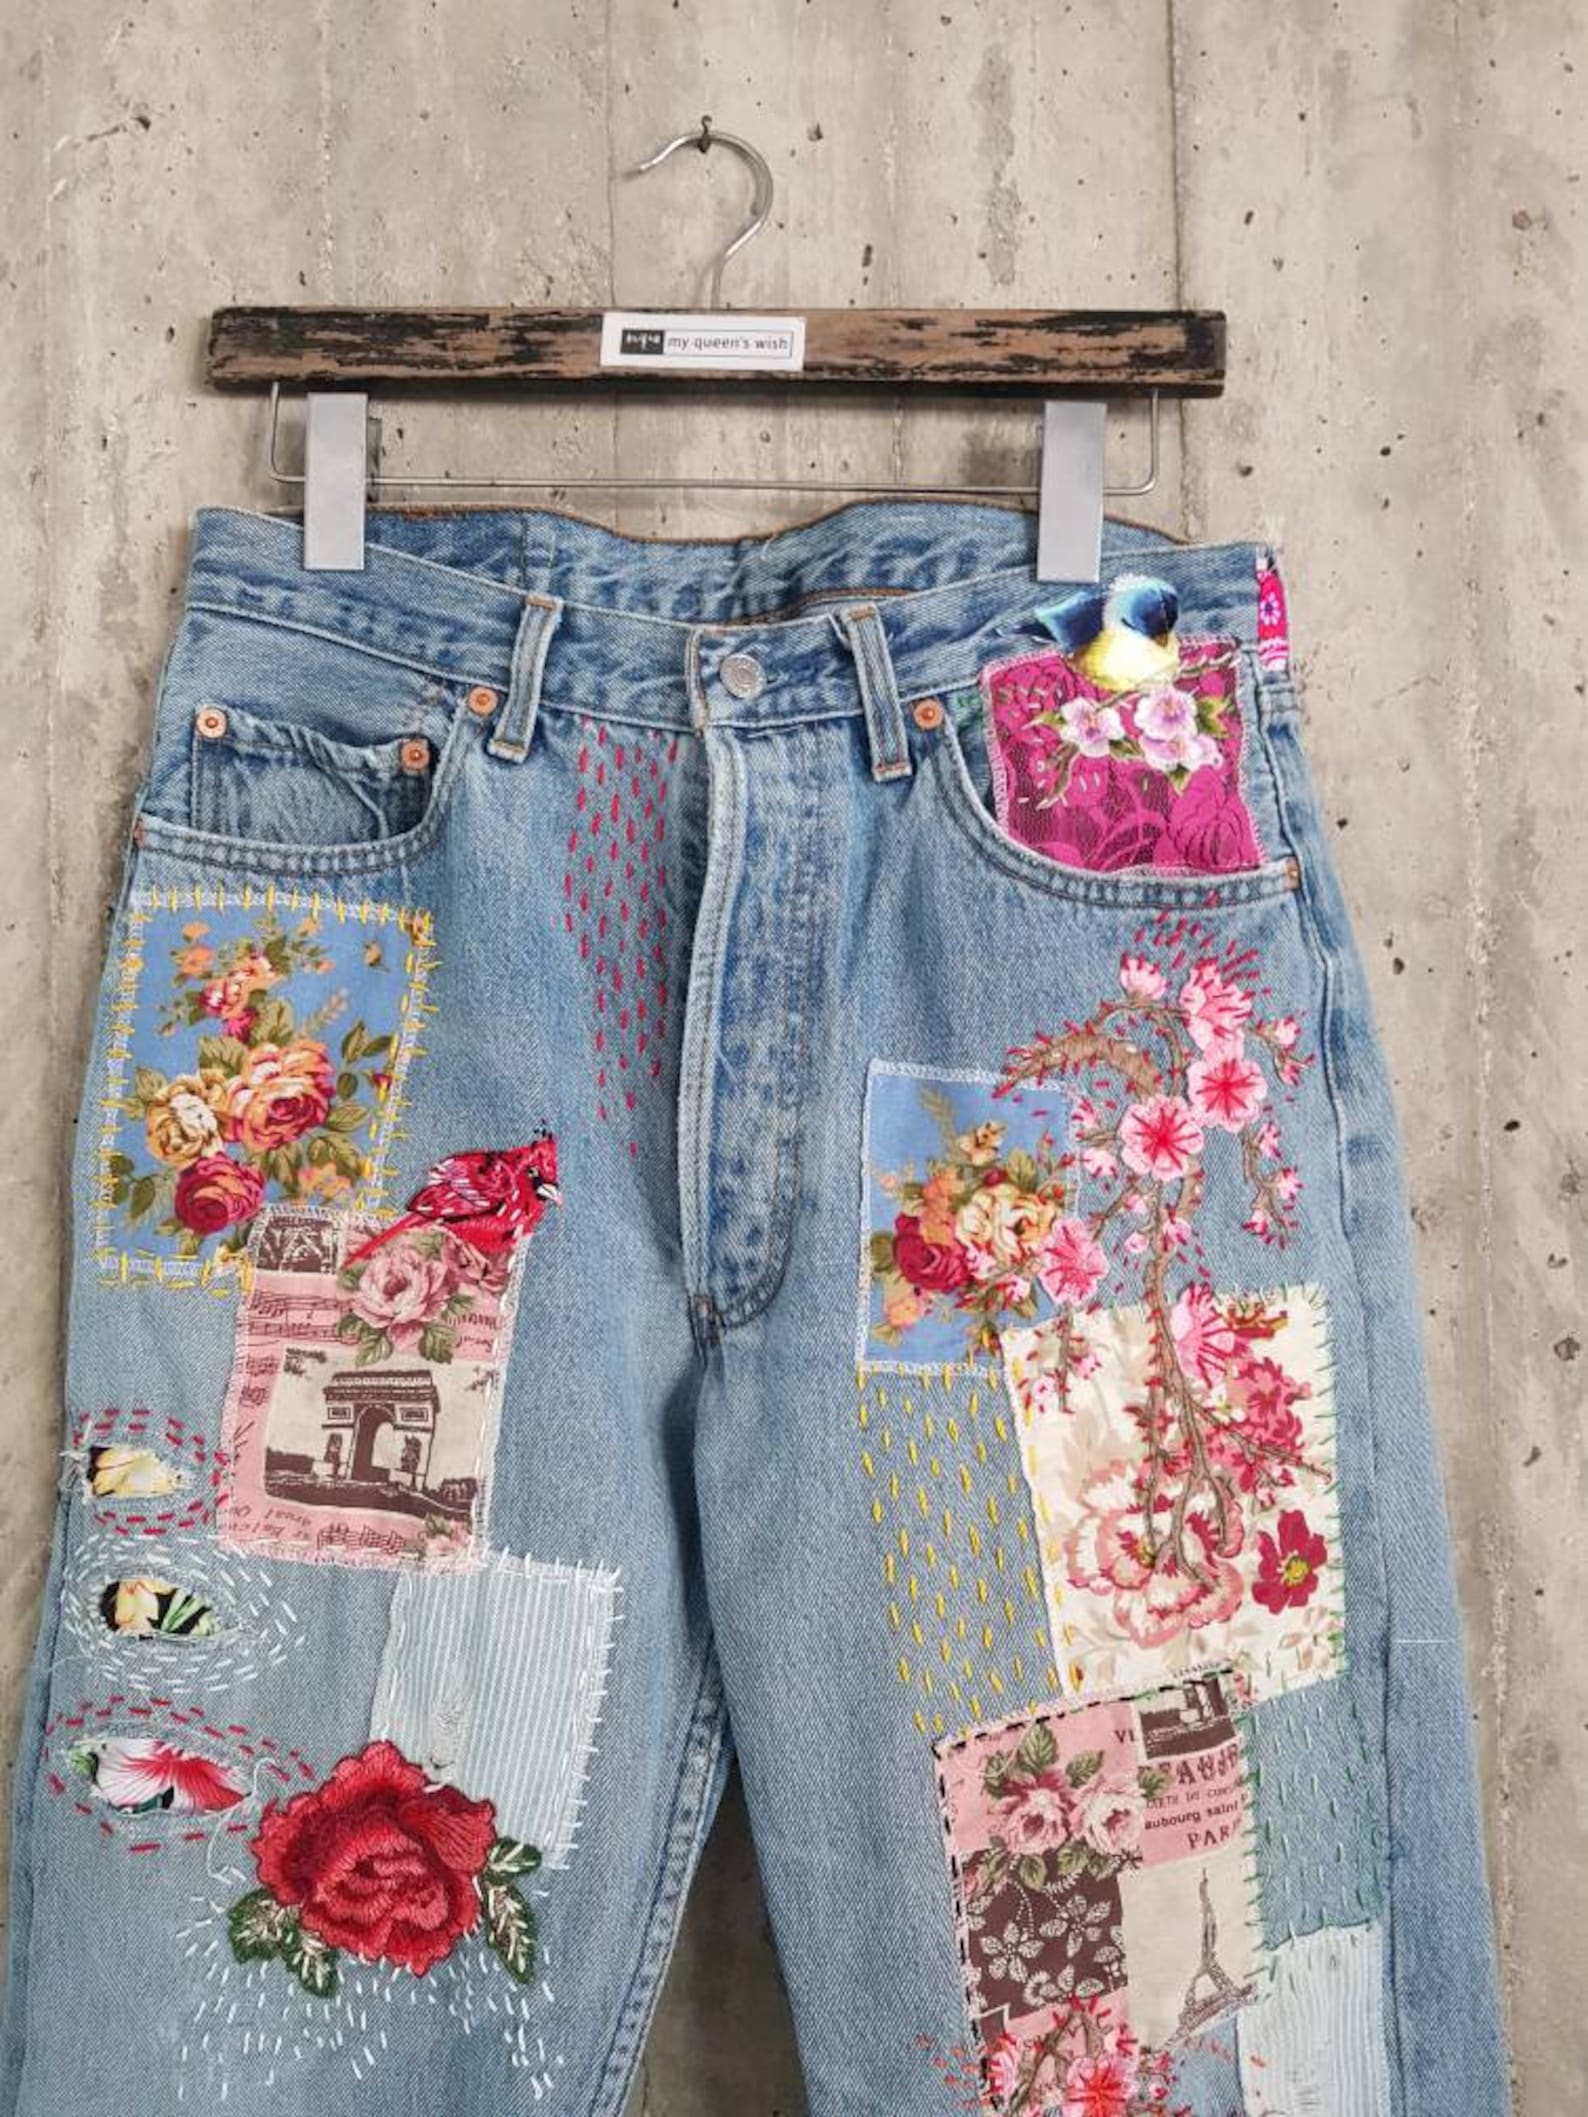 Patched Denim / Patched Jeans / Reworked Vintage Jeans with | Etsy